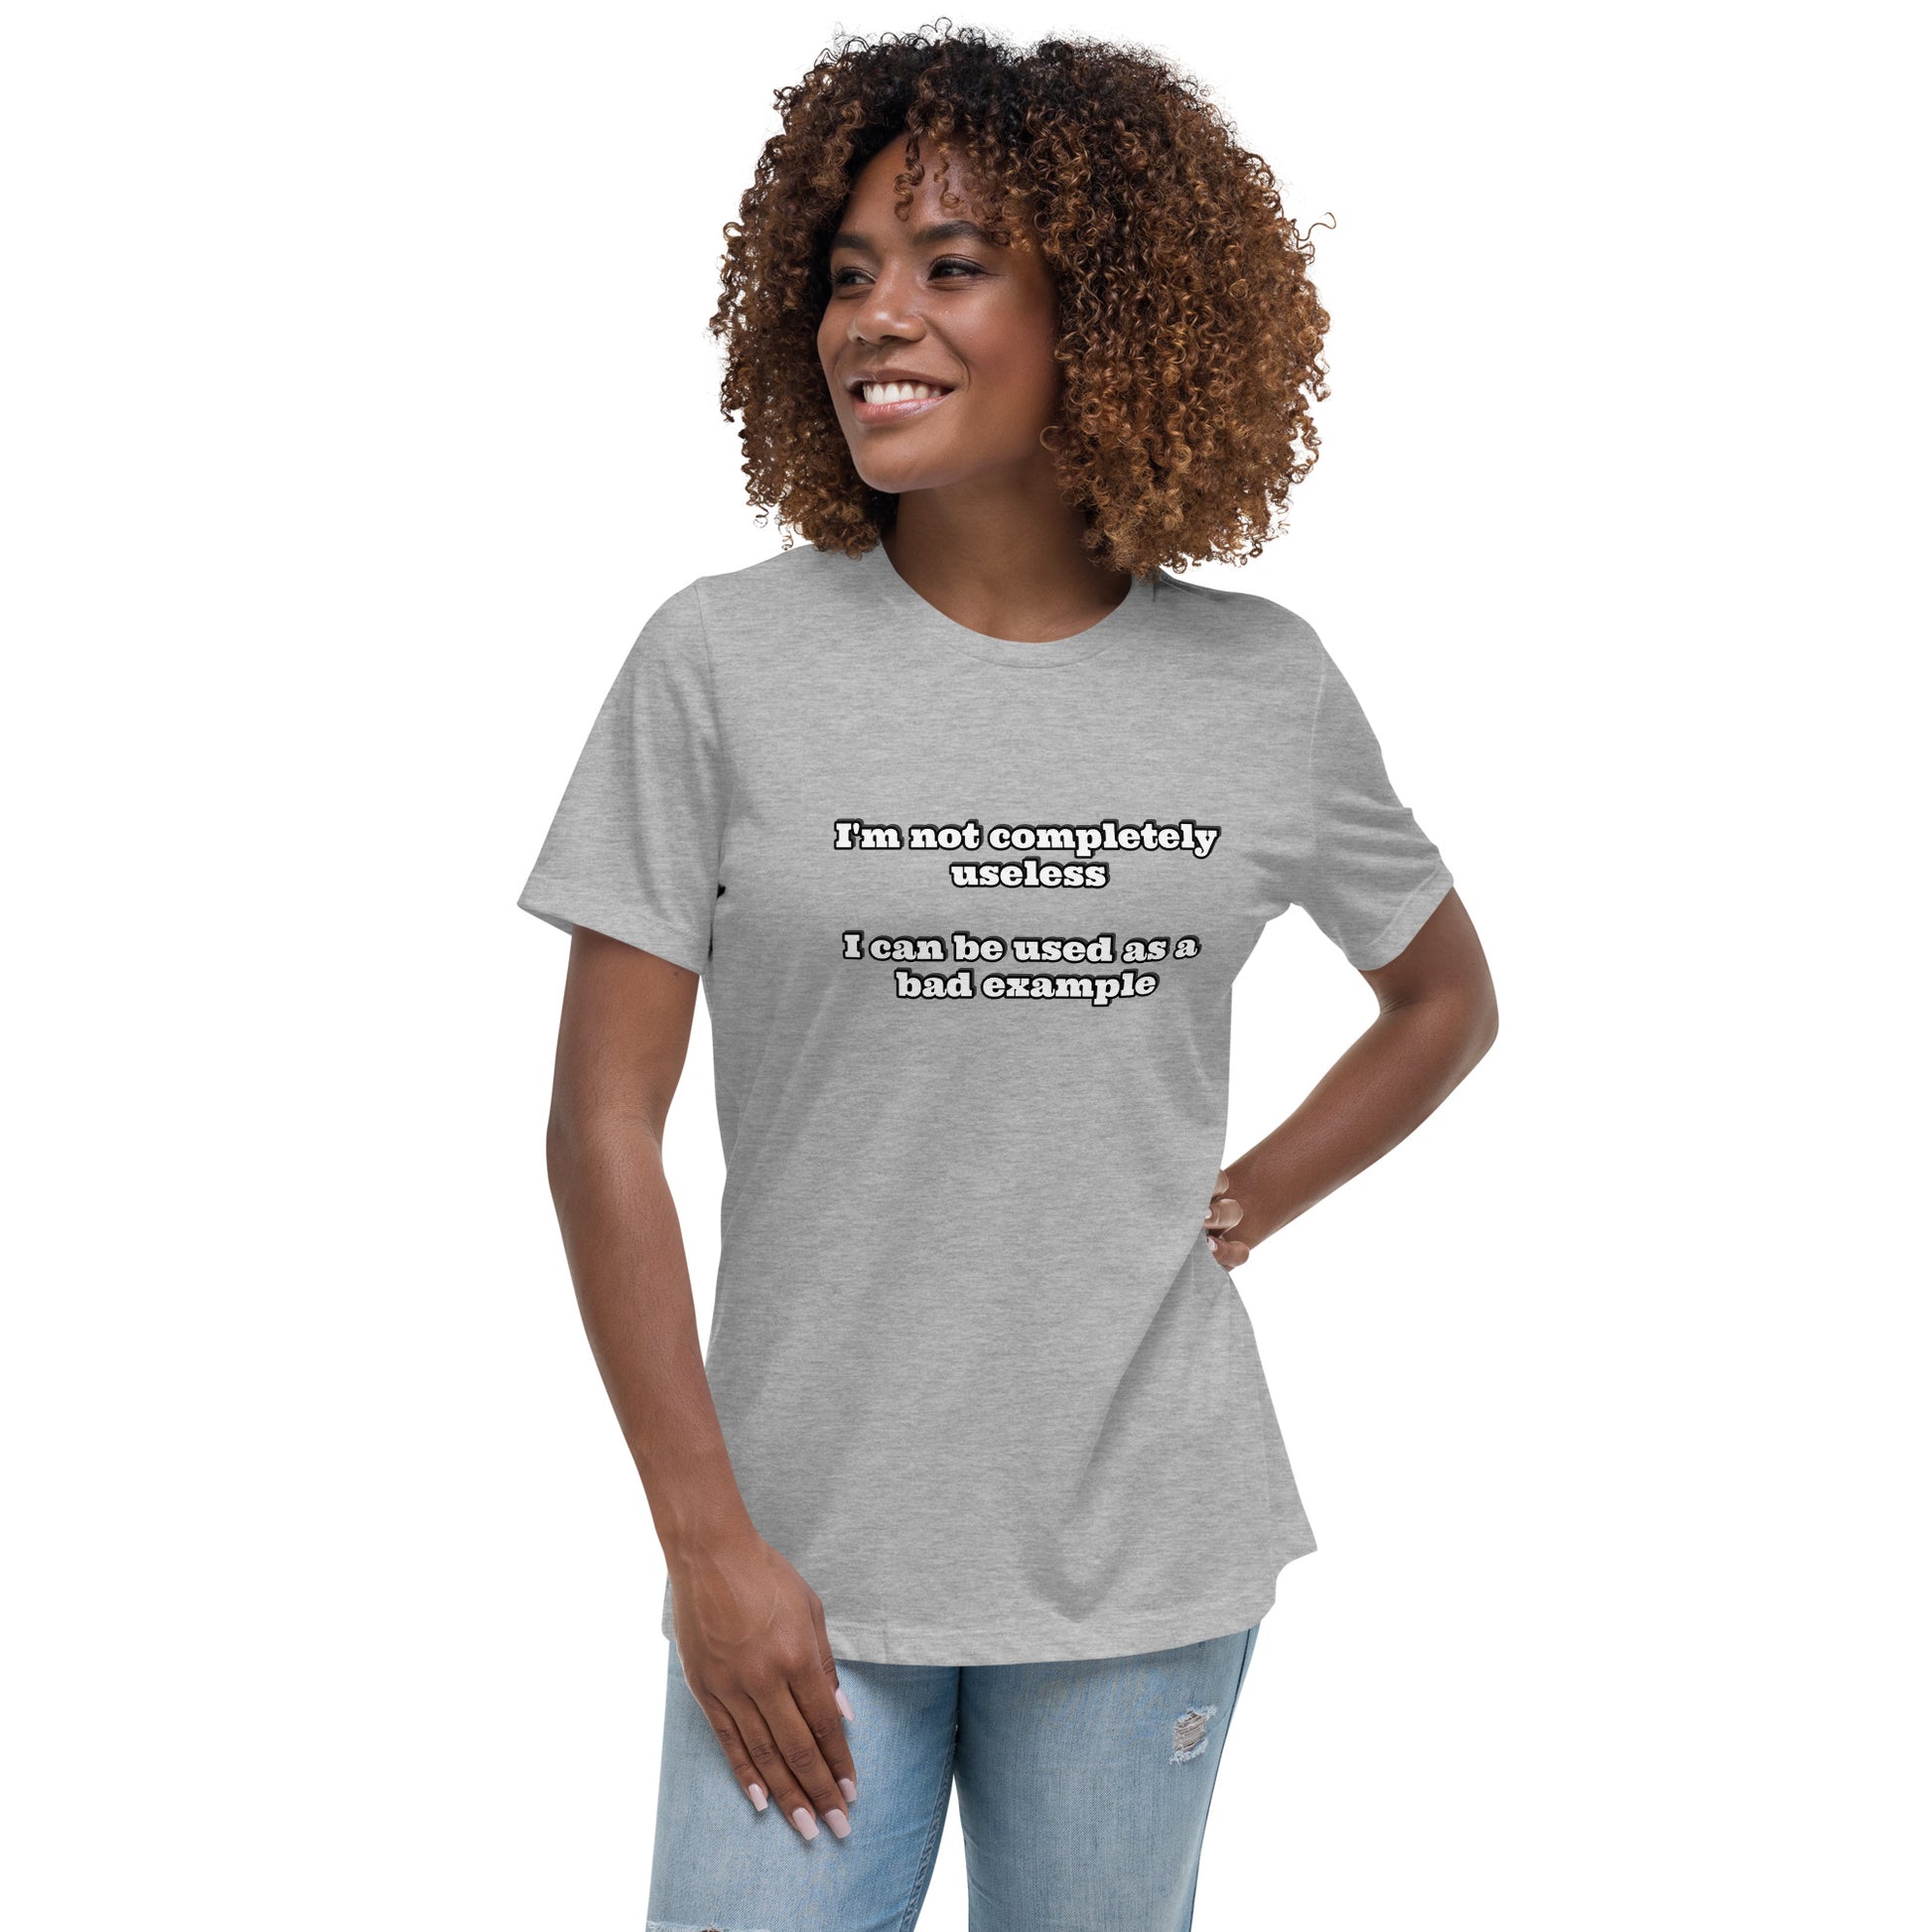 Women with grey t-shirt with text “I'm not completely useless I can be used as a bad example”